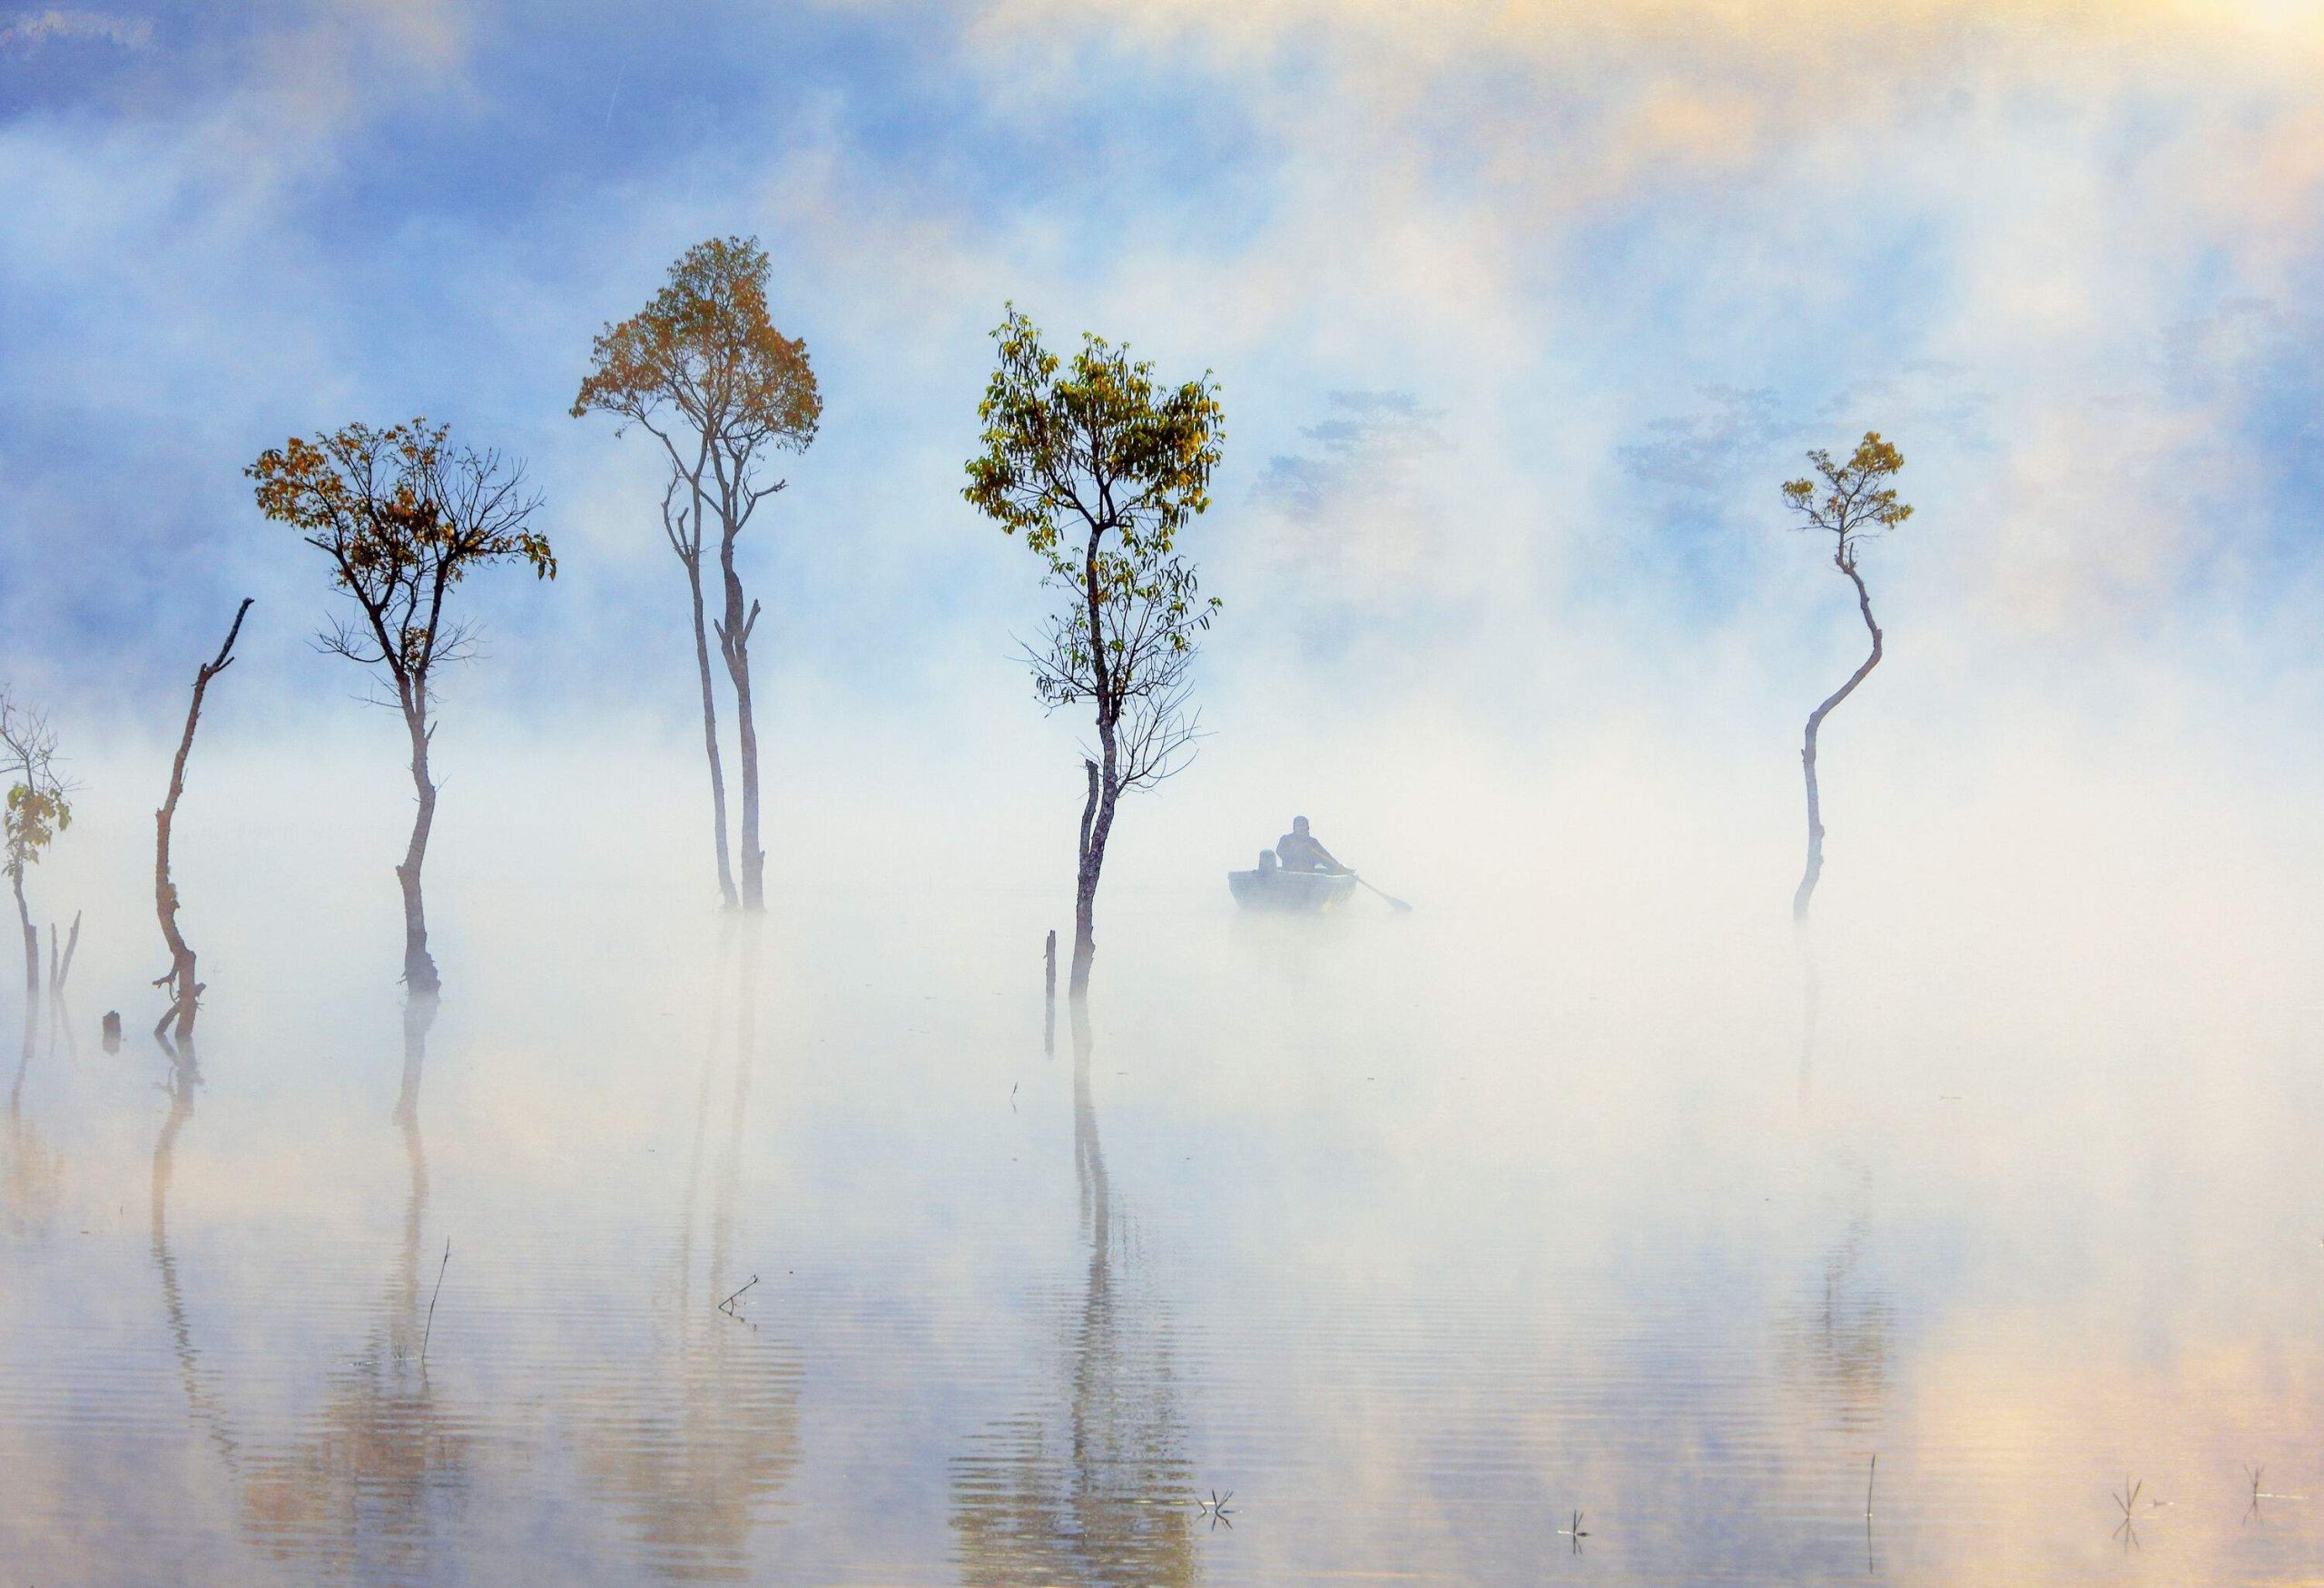 Trees in the middle of calm misty waters.